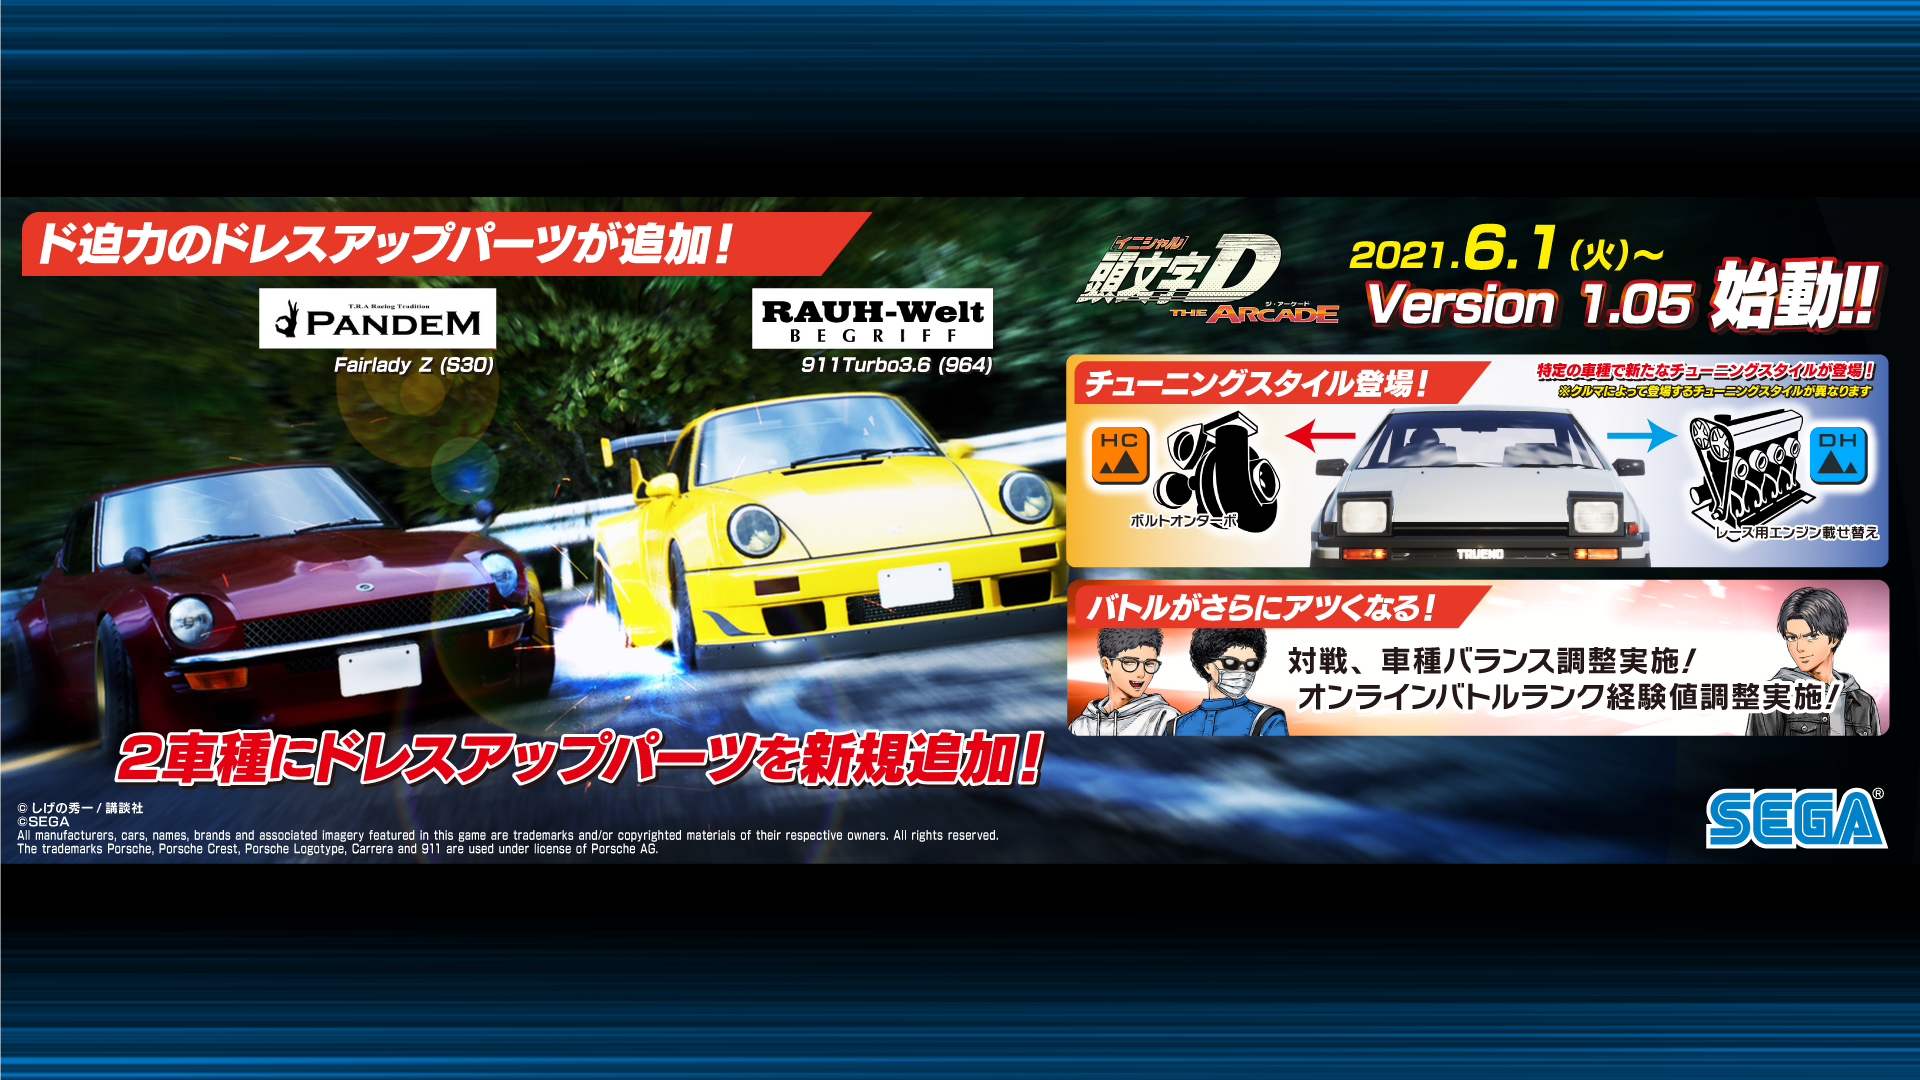 Toyota builds an actual Initial D concept car, plus awesome manga